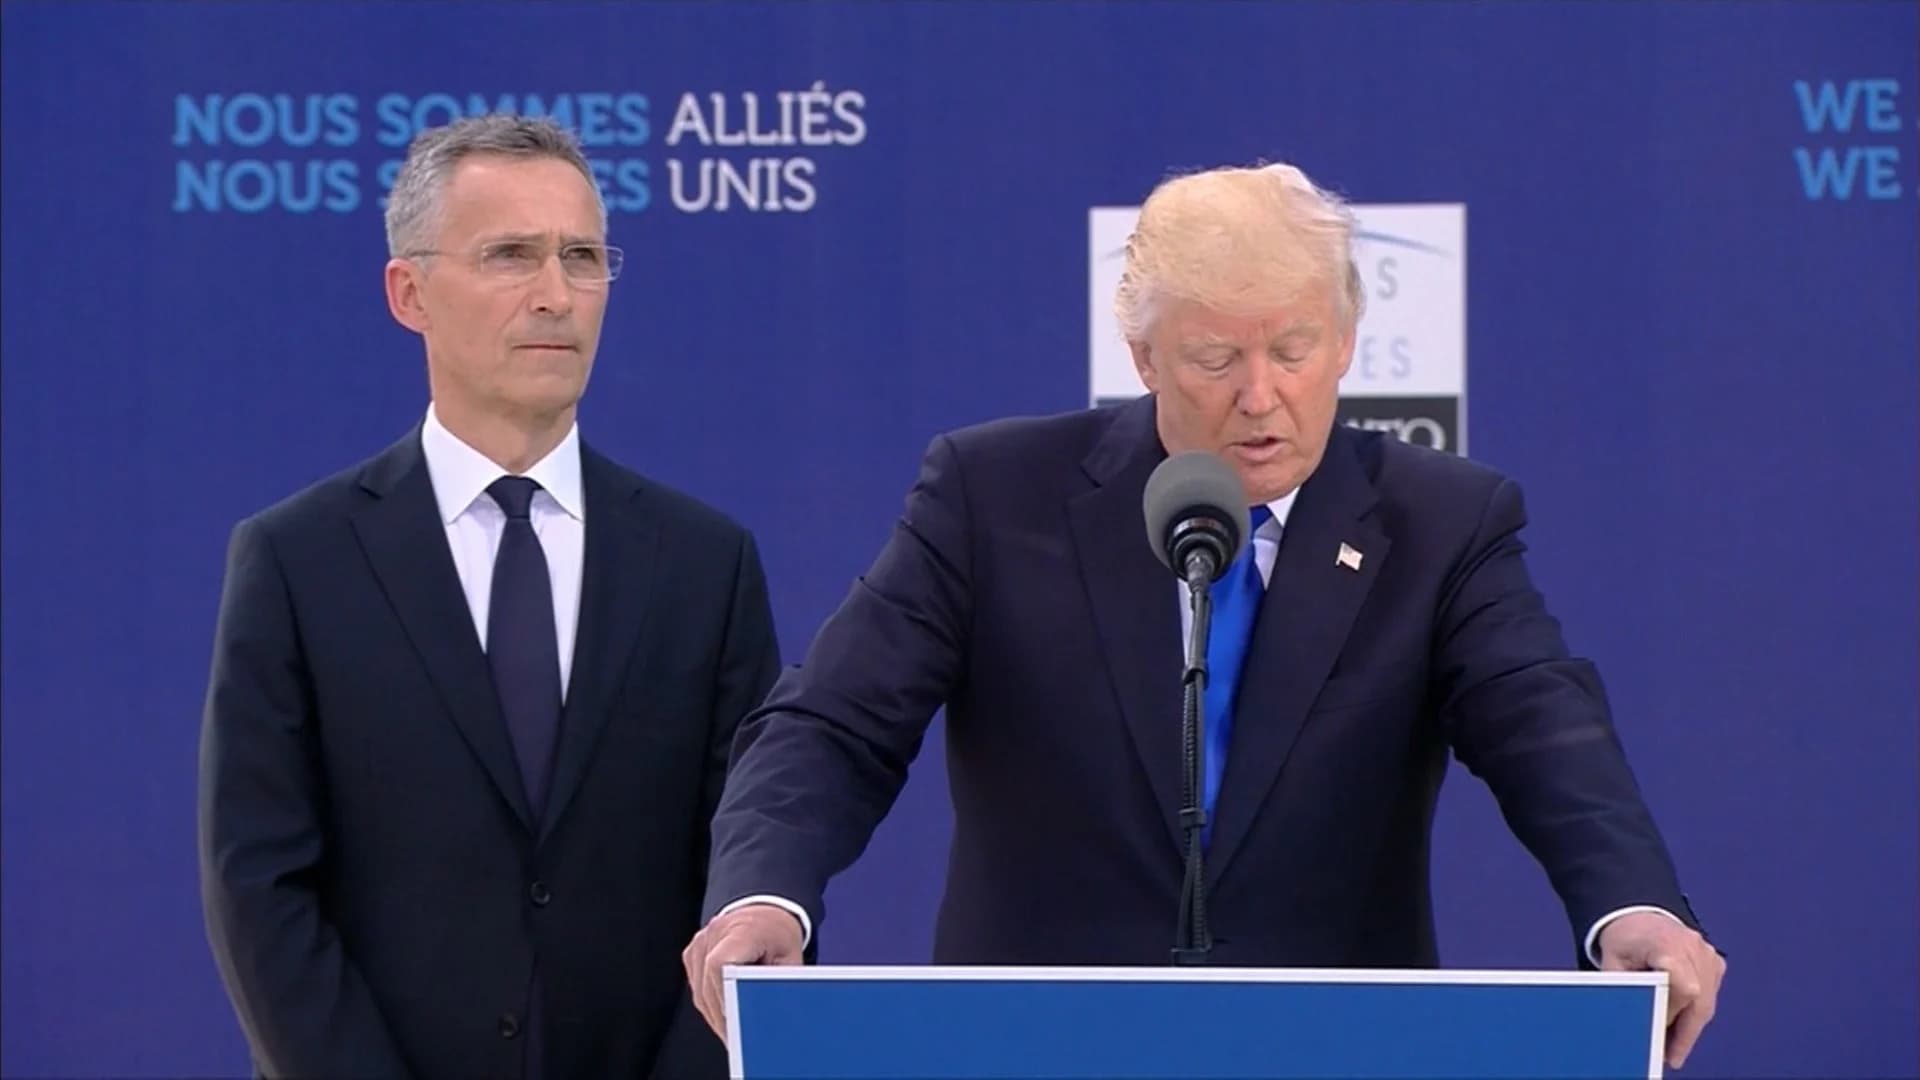 Trump scolds fellow NATO leaders: Spend more for military